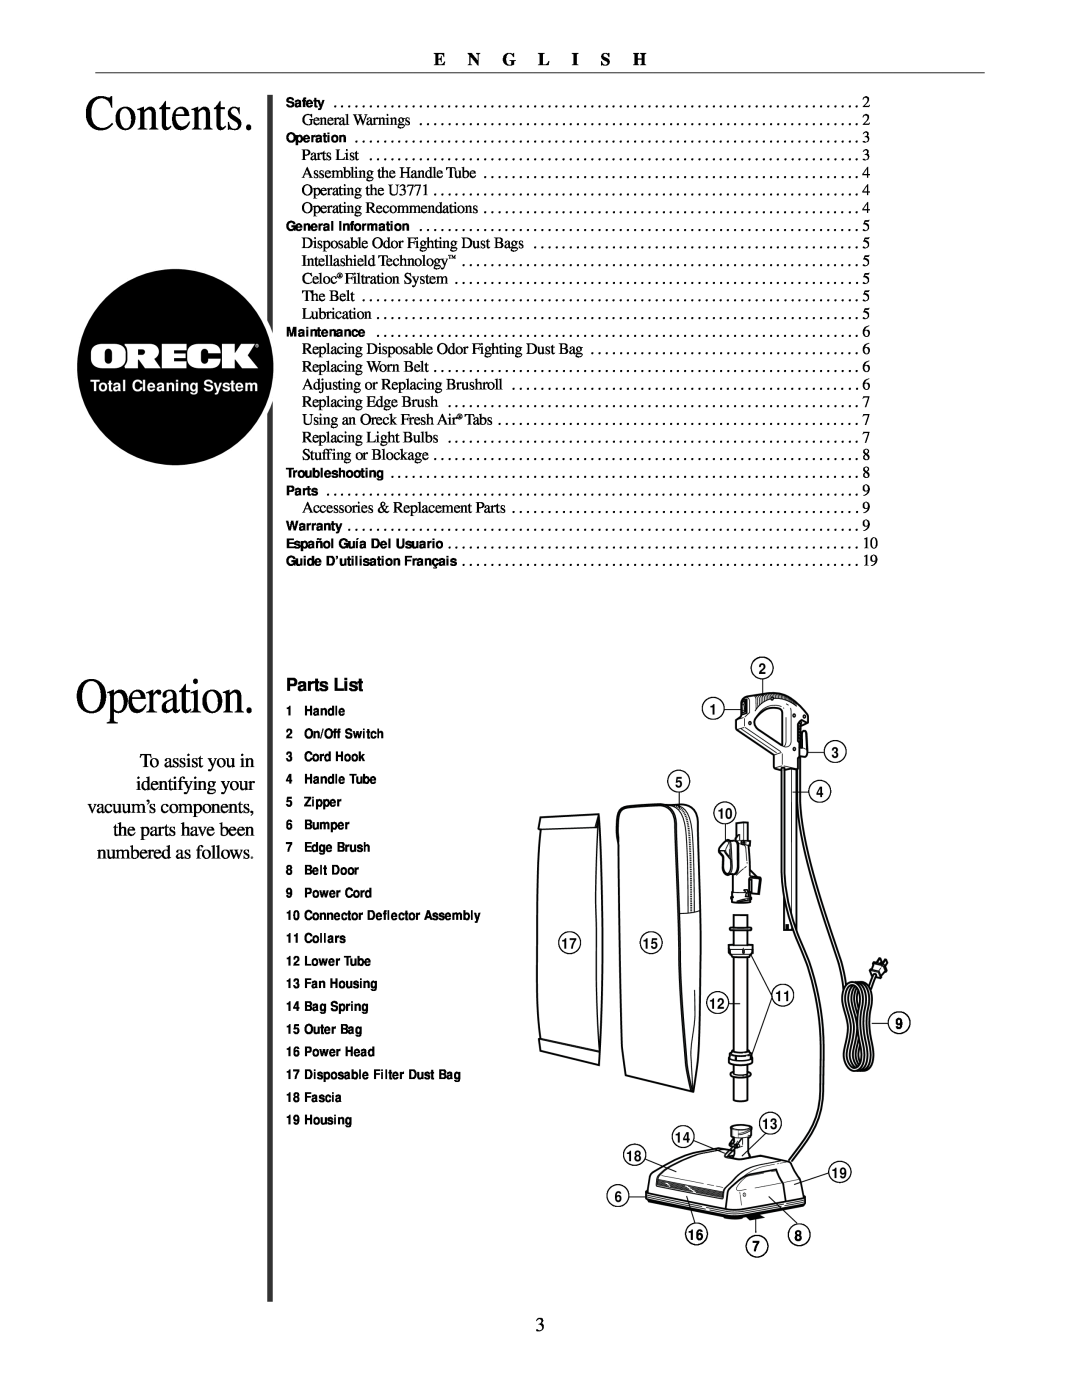 Oreck U3771 manual Contents, Operation, Parts List, Total Cleaning System, E N G L I S H 